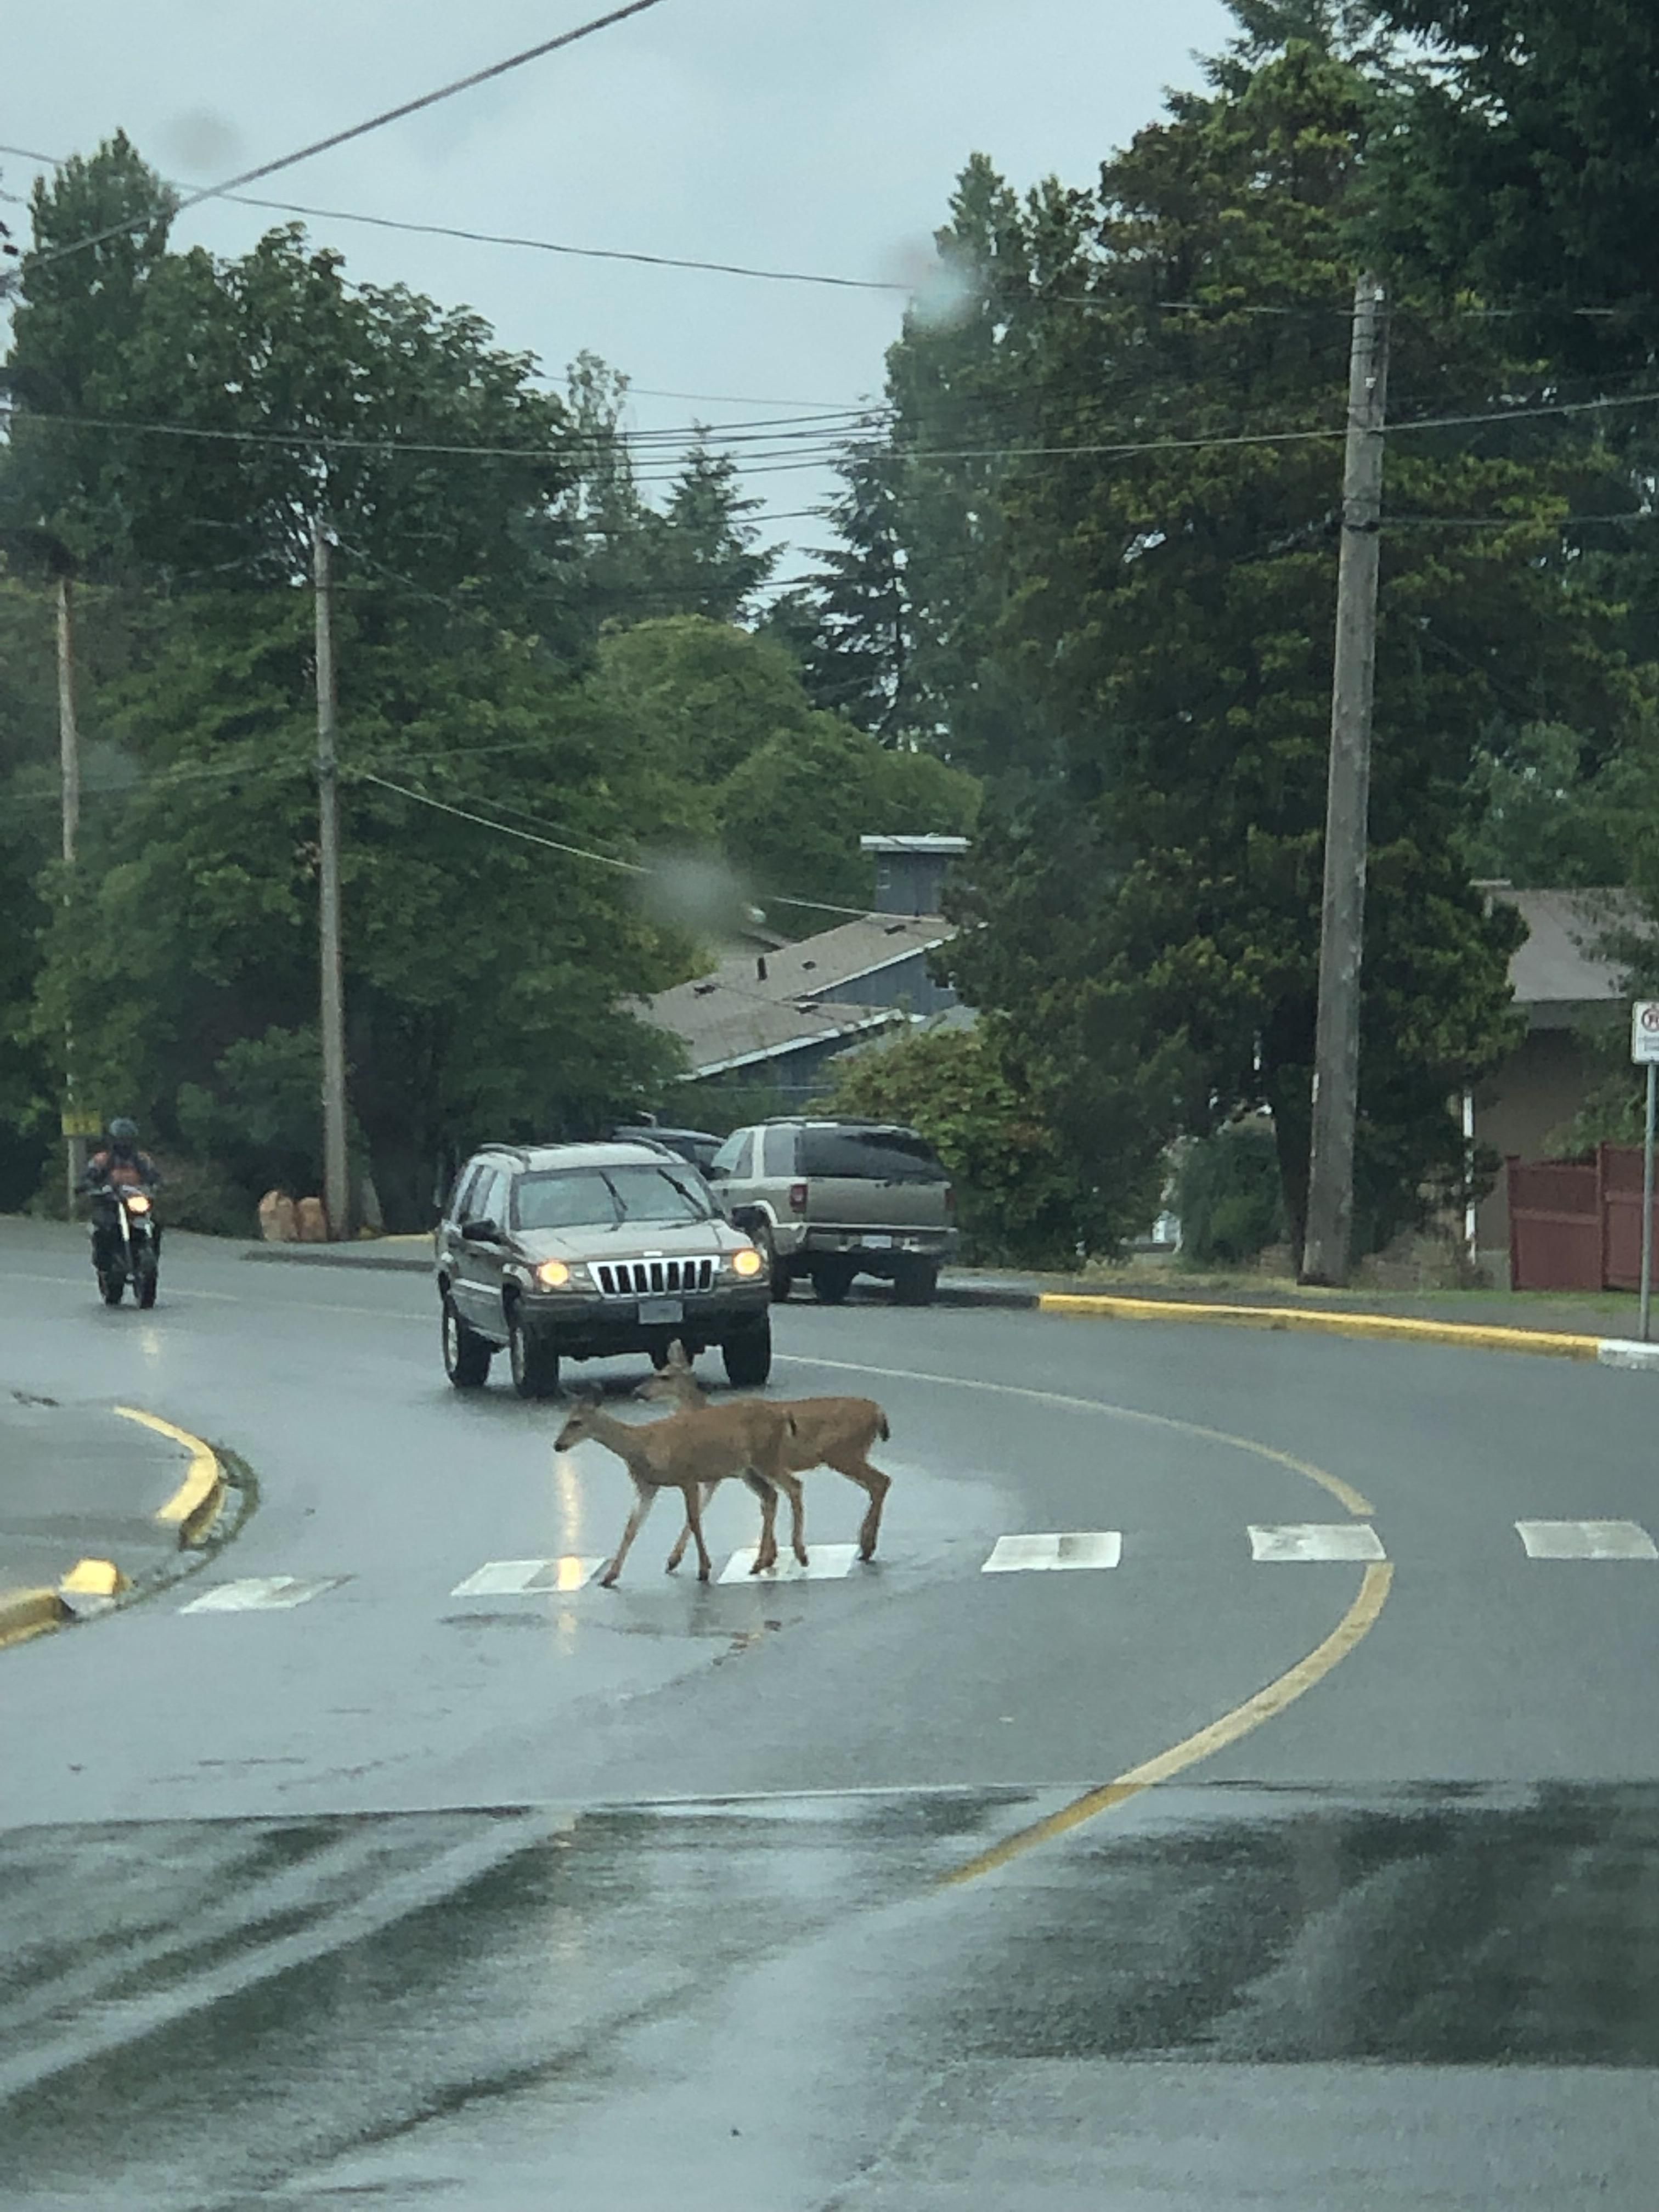 In Canada our deer use the crosswalk